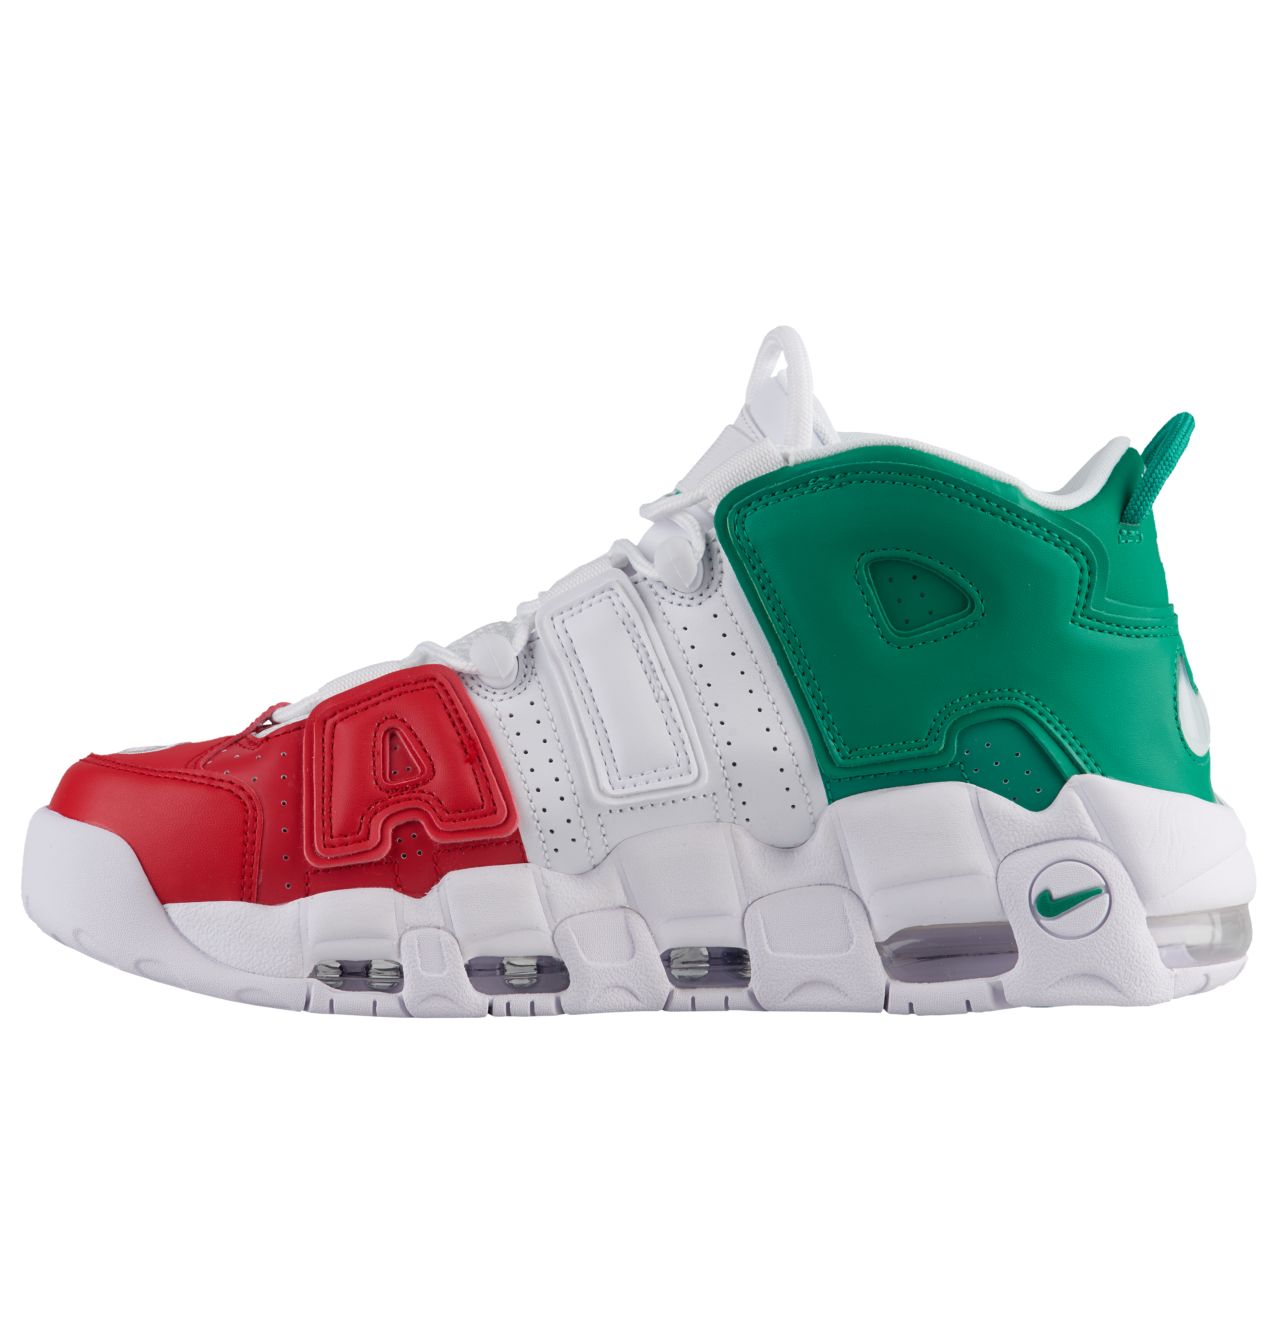 NIKE AIR MORE UPTEMPO 96 'ITALY' 2 